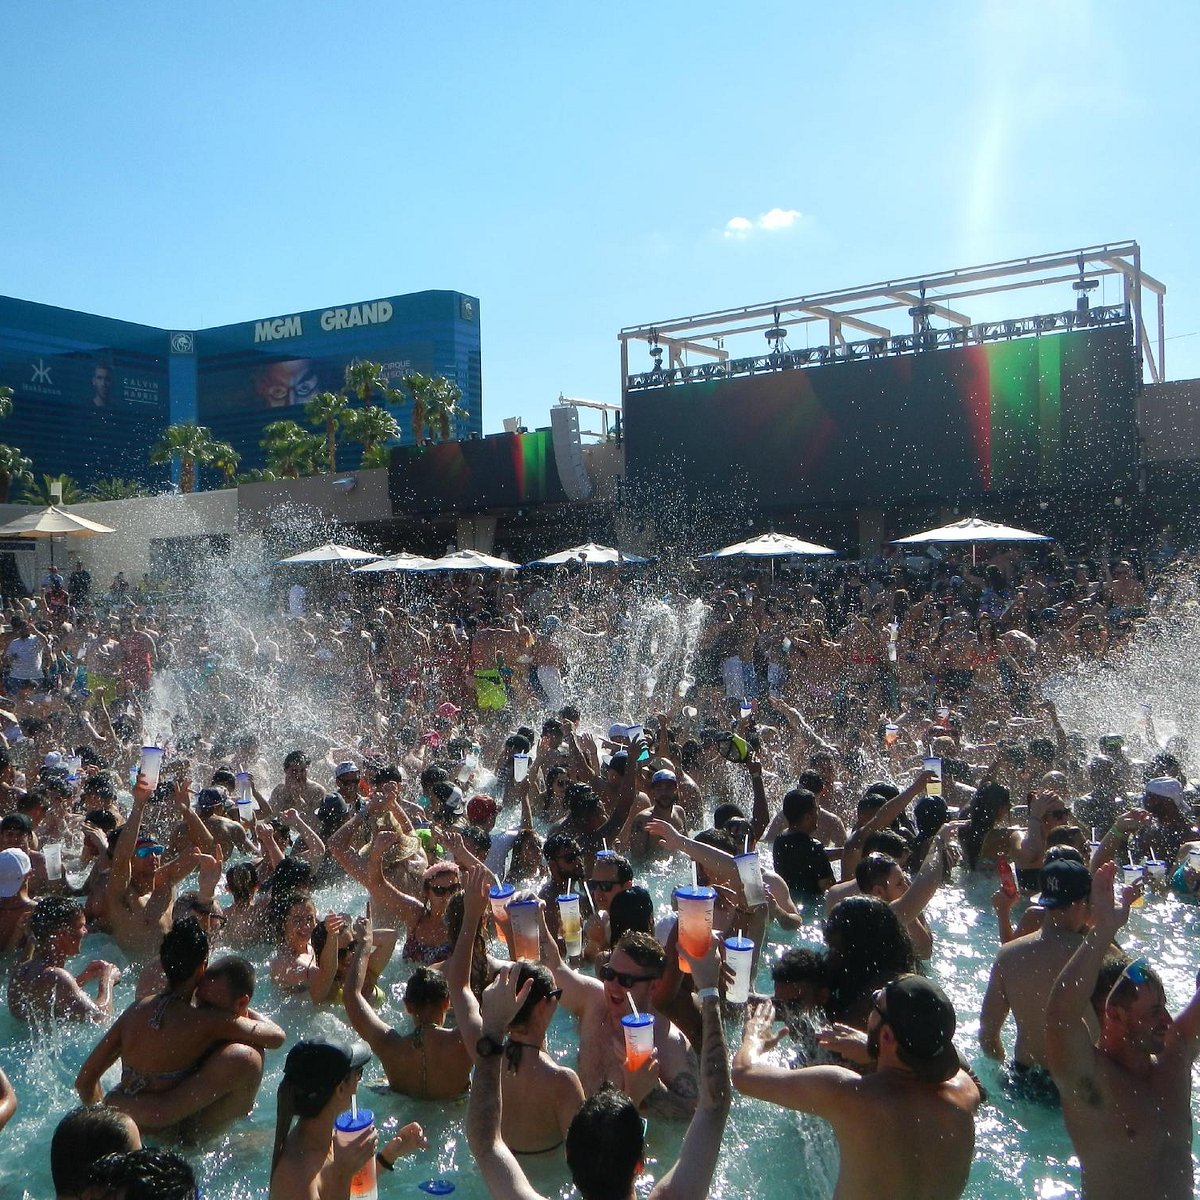 THE PARTY AT WET REPUBLIC ULTRA POOL AT MGM GRAND IN LAS VEGAS!! — Steemit